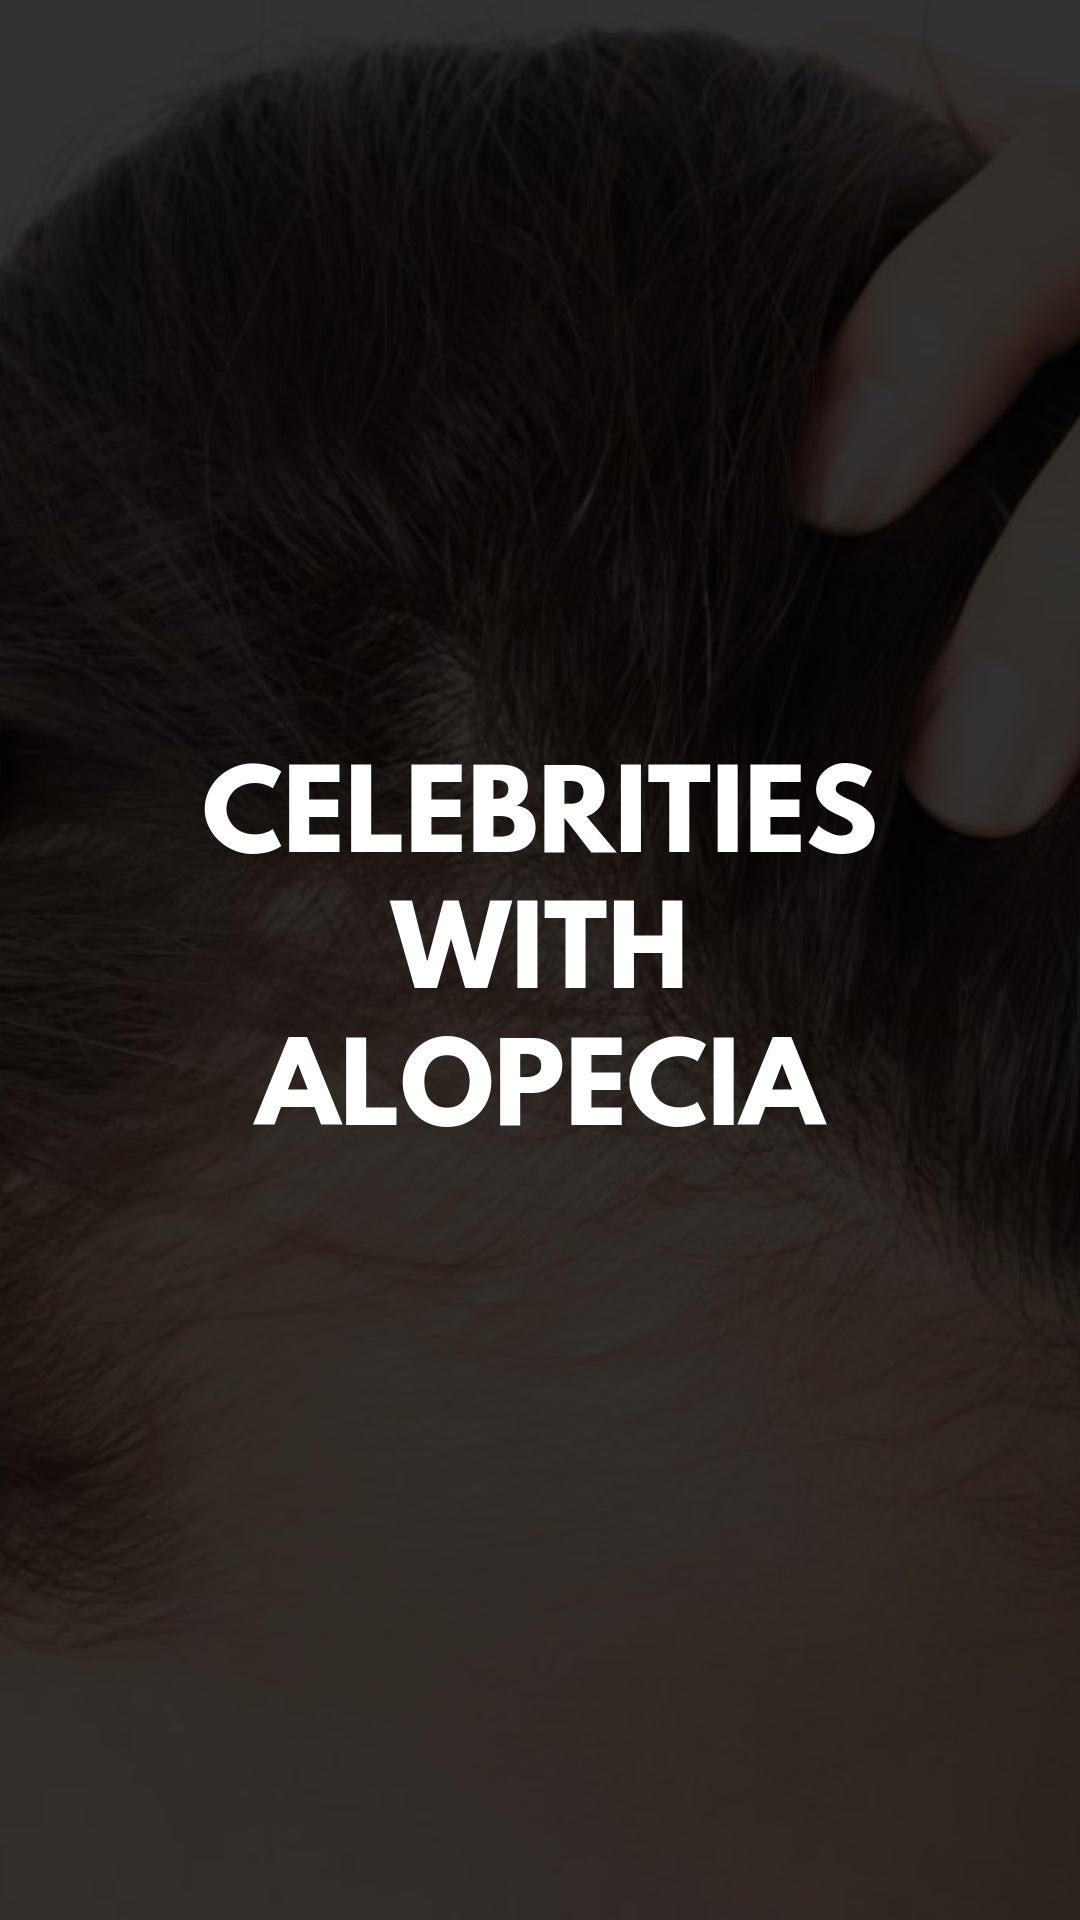 Celebrities with Alopecia